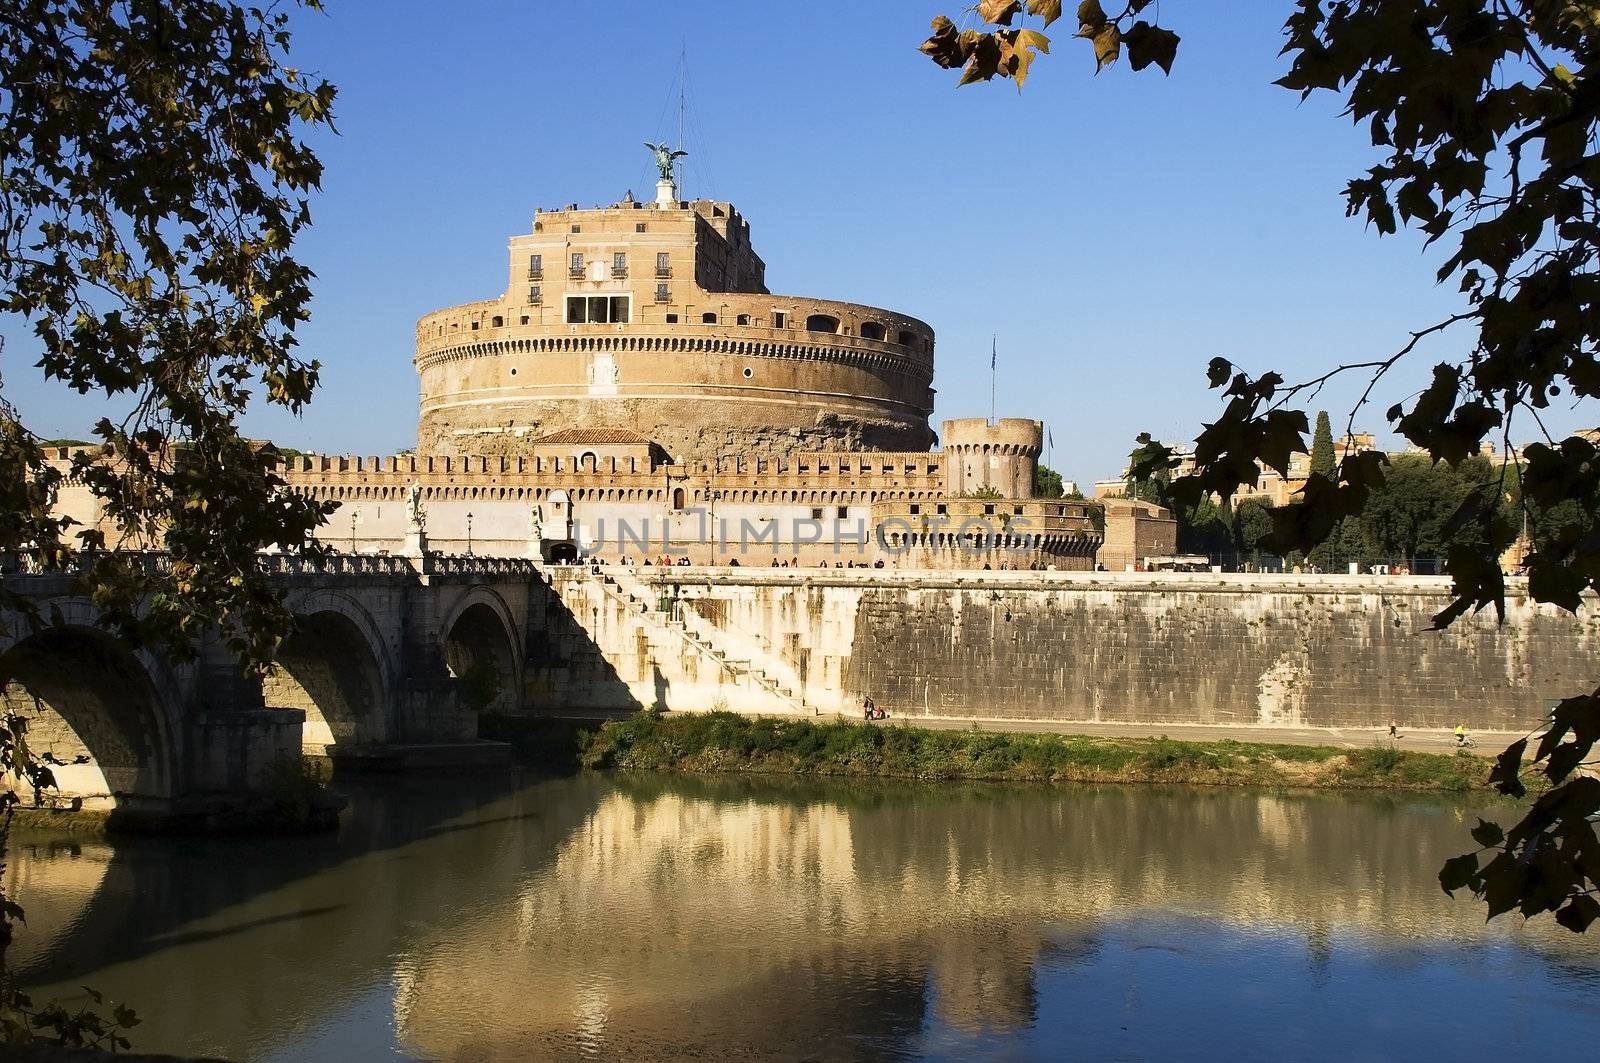 View of Castle Sant'Angelo, Rome by irisphoto4